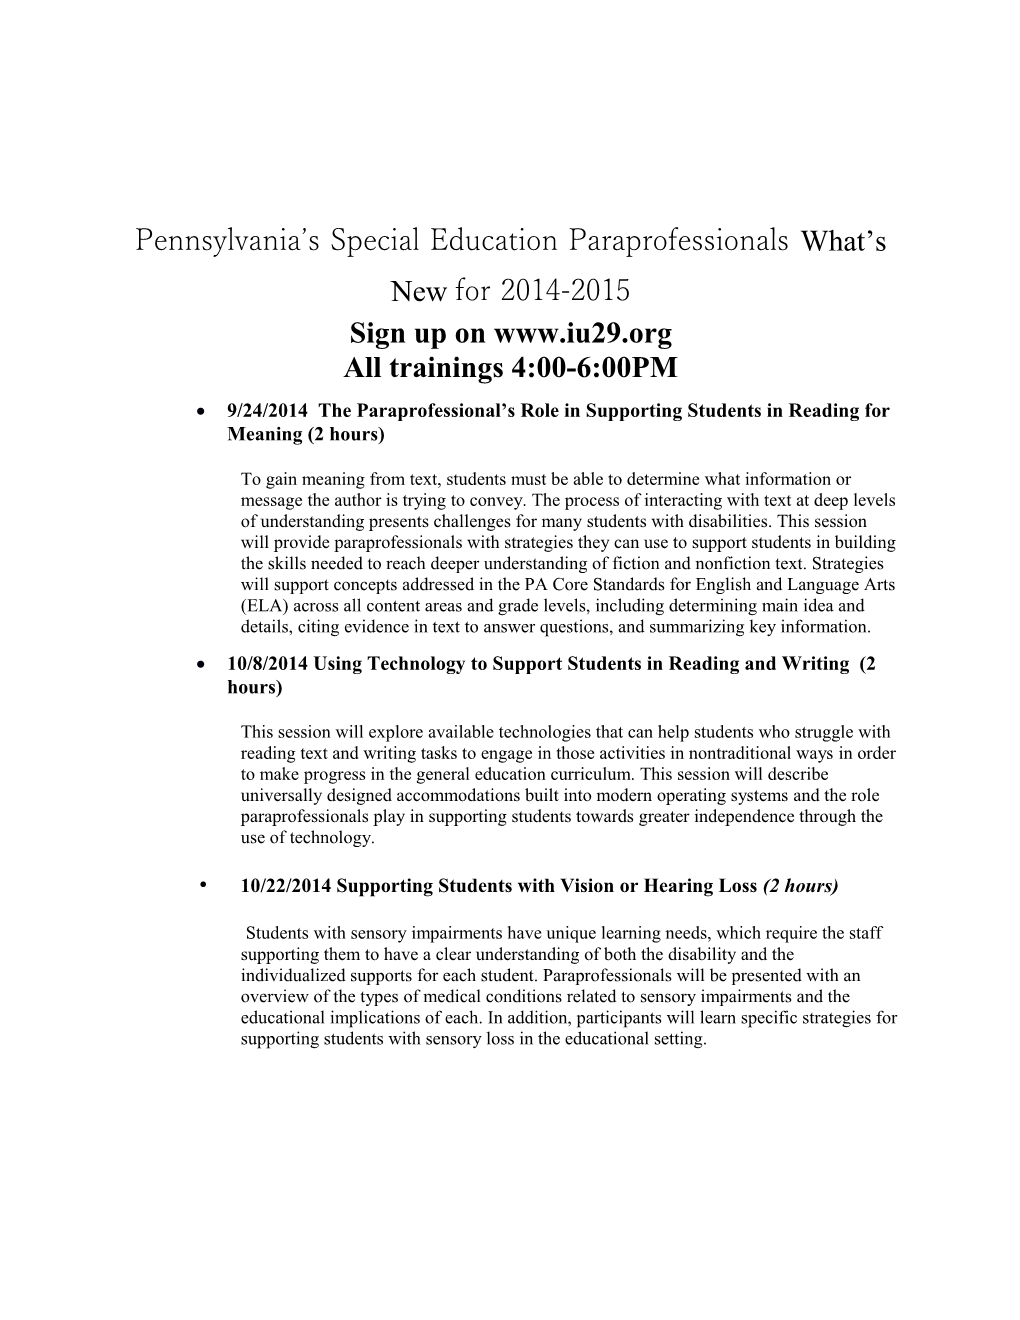 Pennsylvania S Special Education Paraprofessionals What S New for 2014-2015